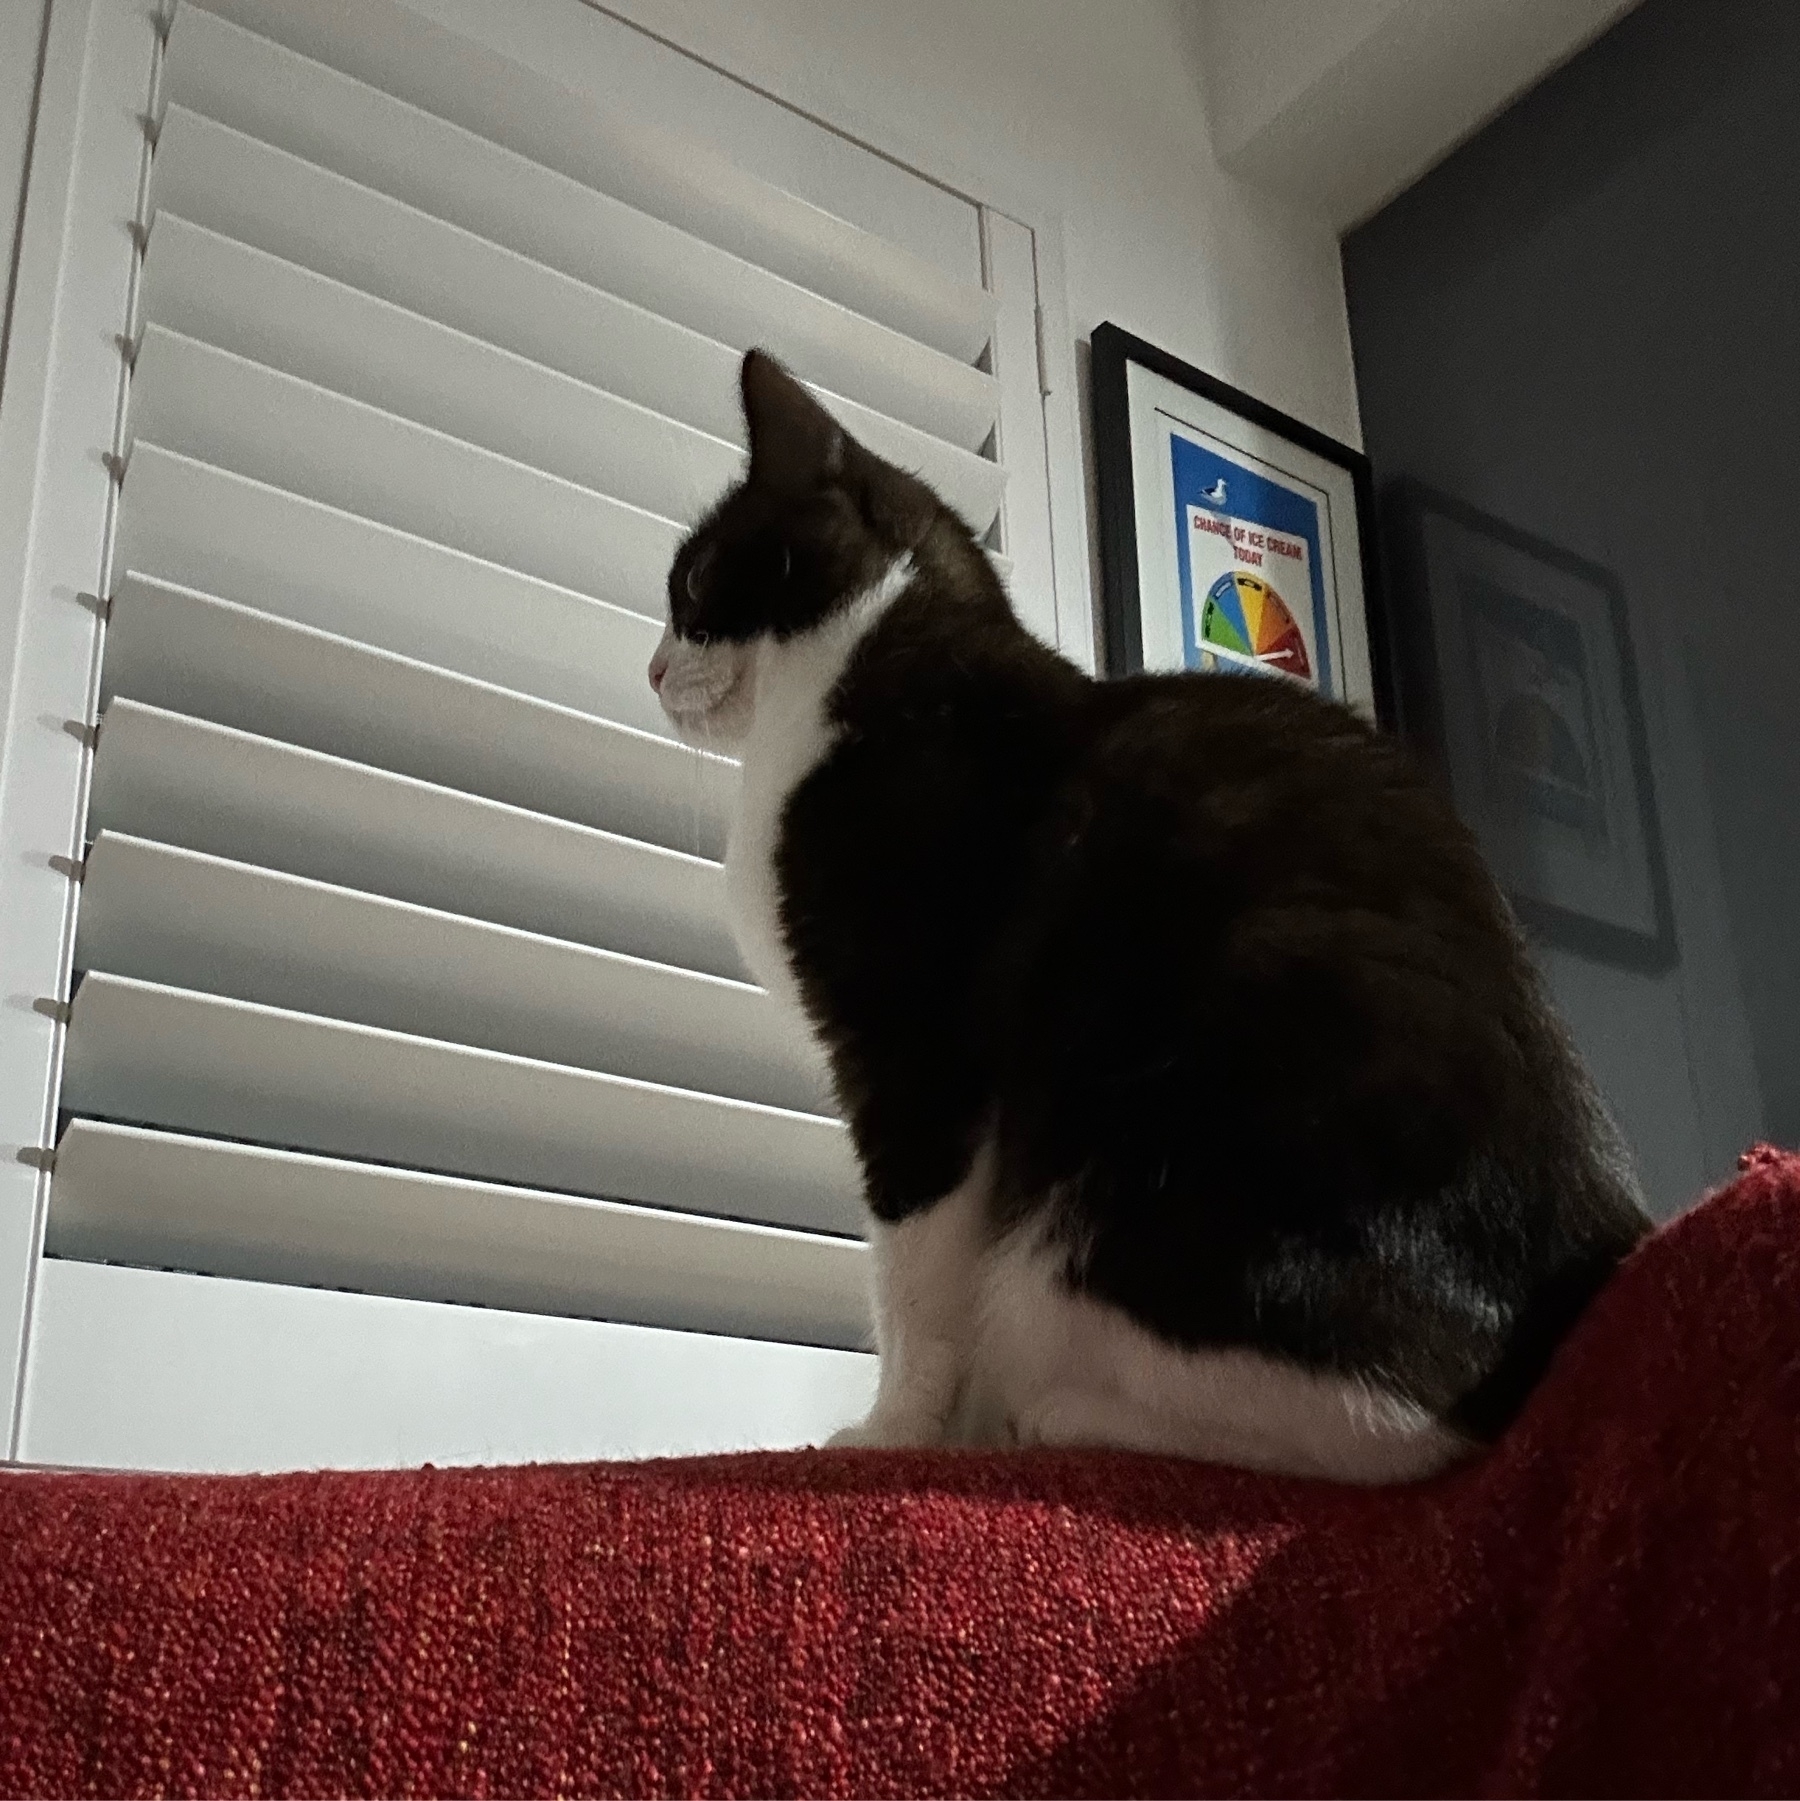 A side profile of a black and white cat sitting on top of a large armchair. Her body is mainly black but white is visible on her belly, jaw and lower half of her legs. The armchair is covered in a red throw rug. The cat is looking towards a window that has plantation shutters open in front of it.